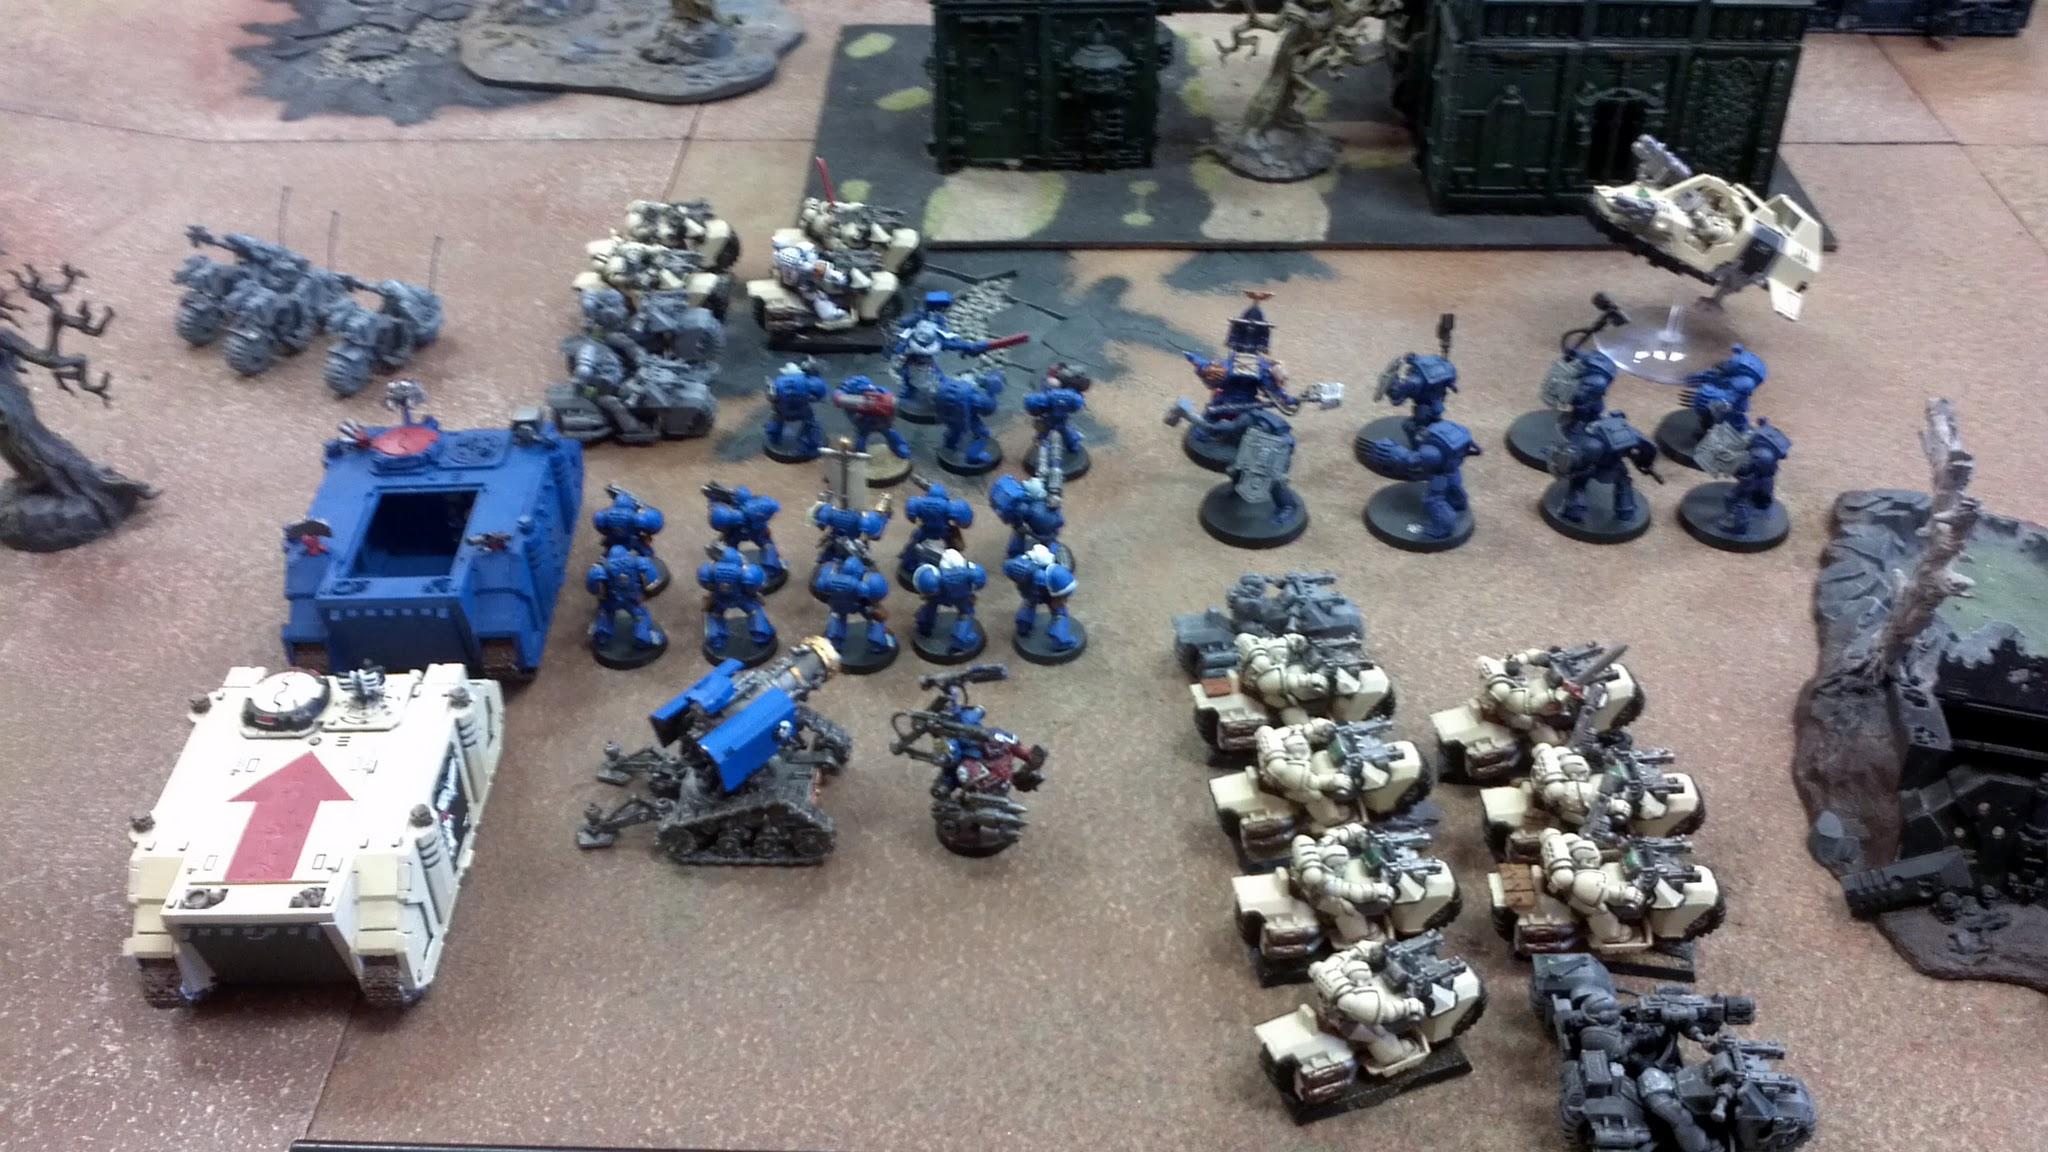 My current codex space marine list with some bikes